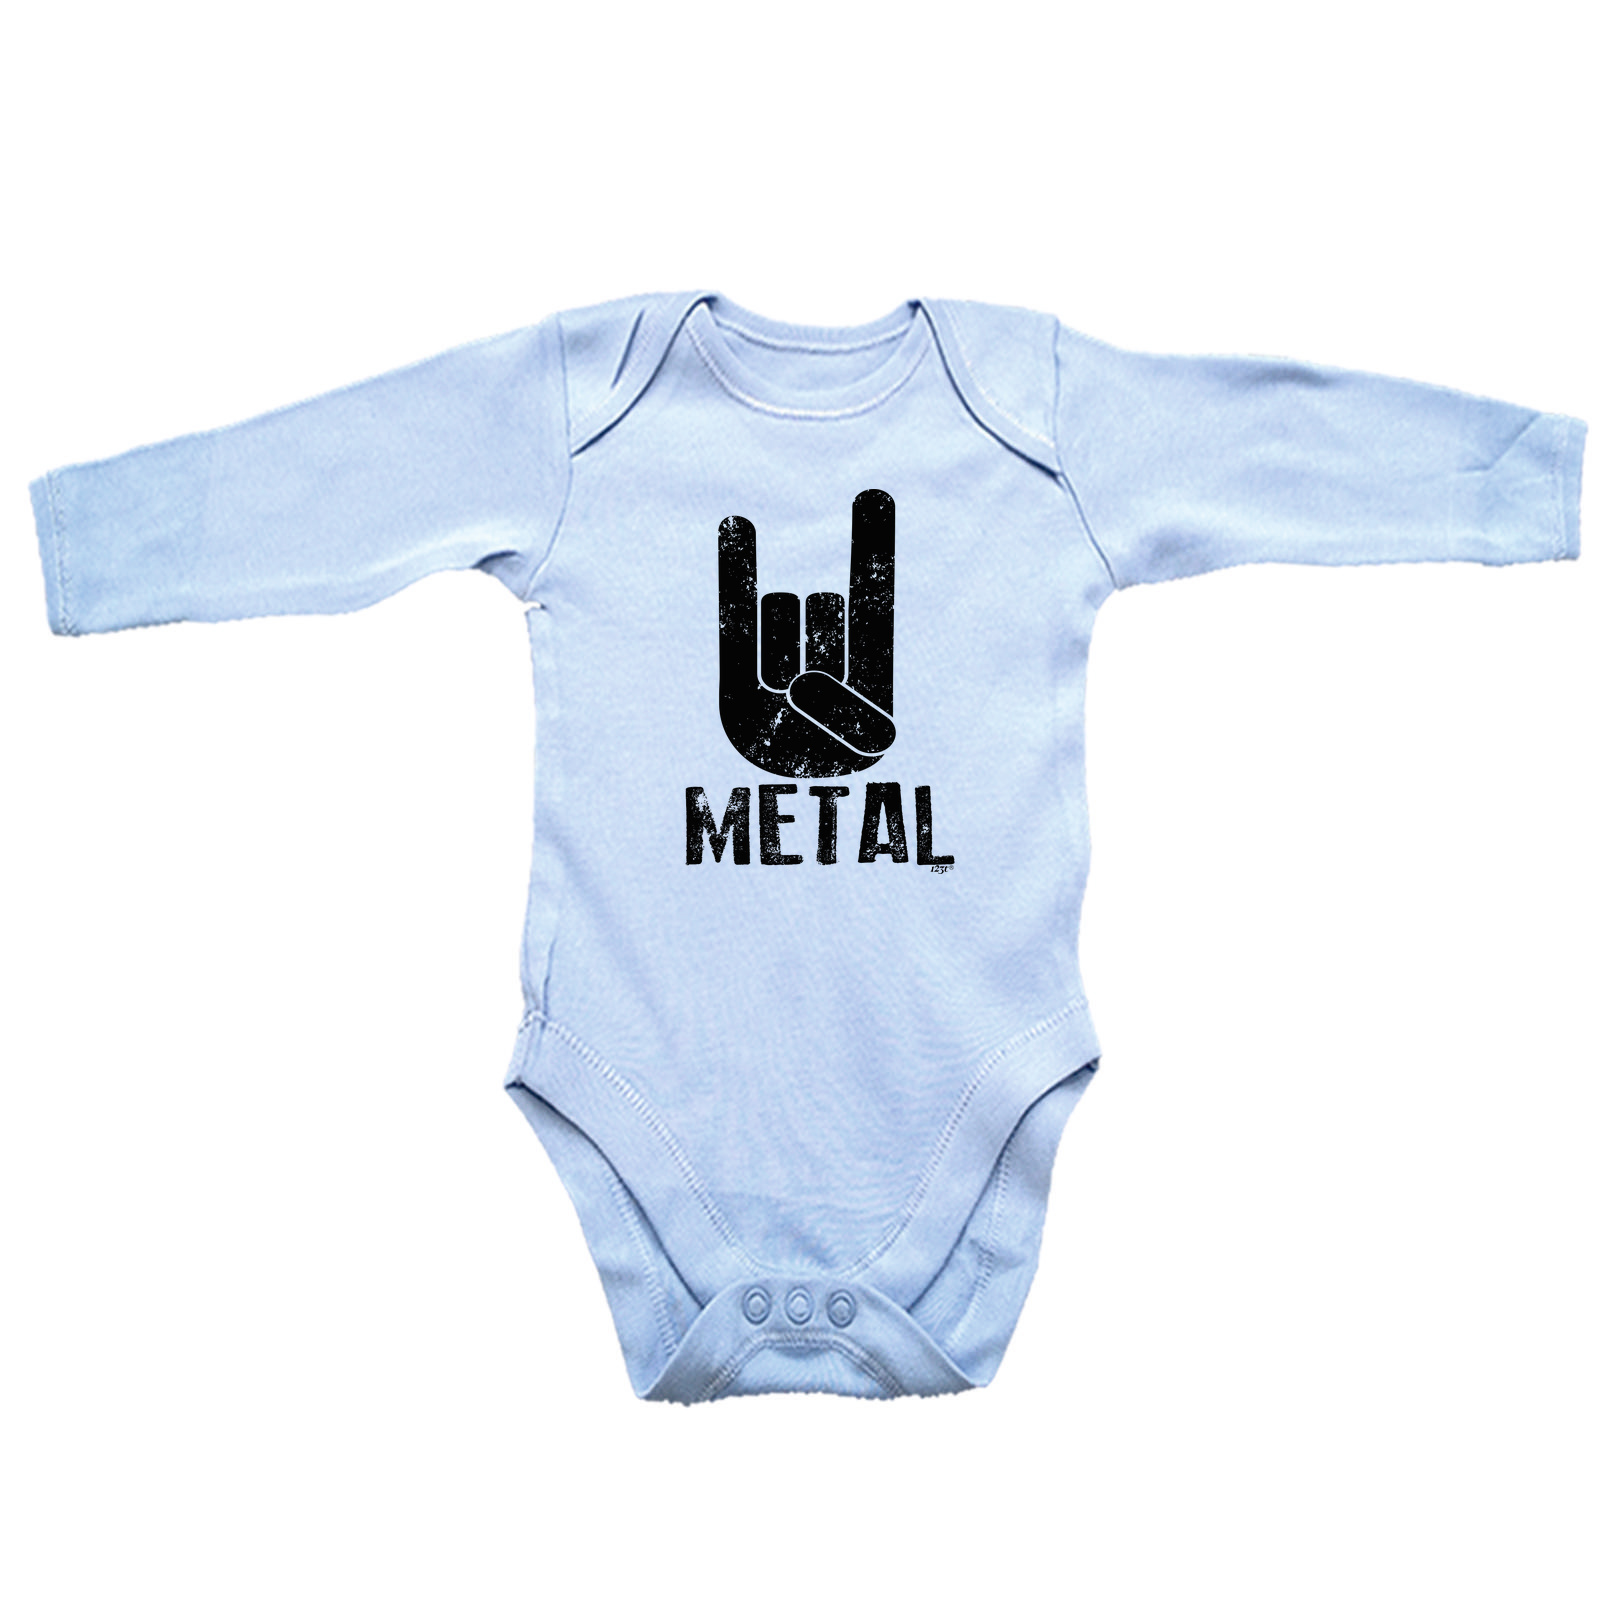 Jumpsuit Romper Pajamas Gifts Gift Novelty Babygrows Brand 568 123t Funny Babygrow 